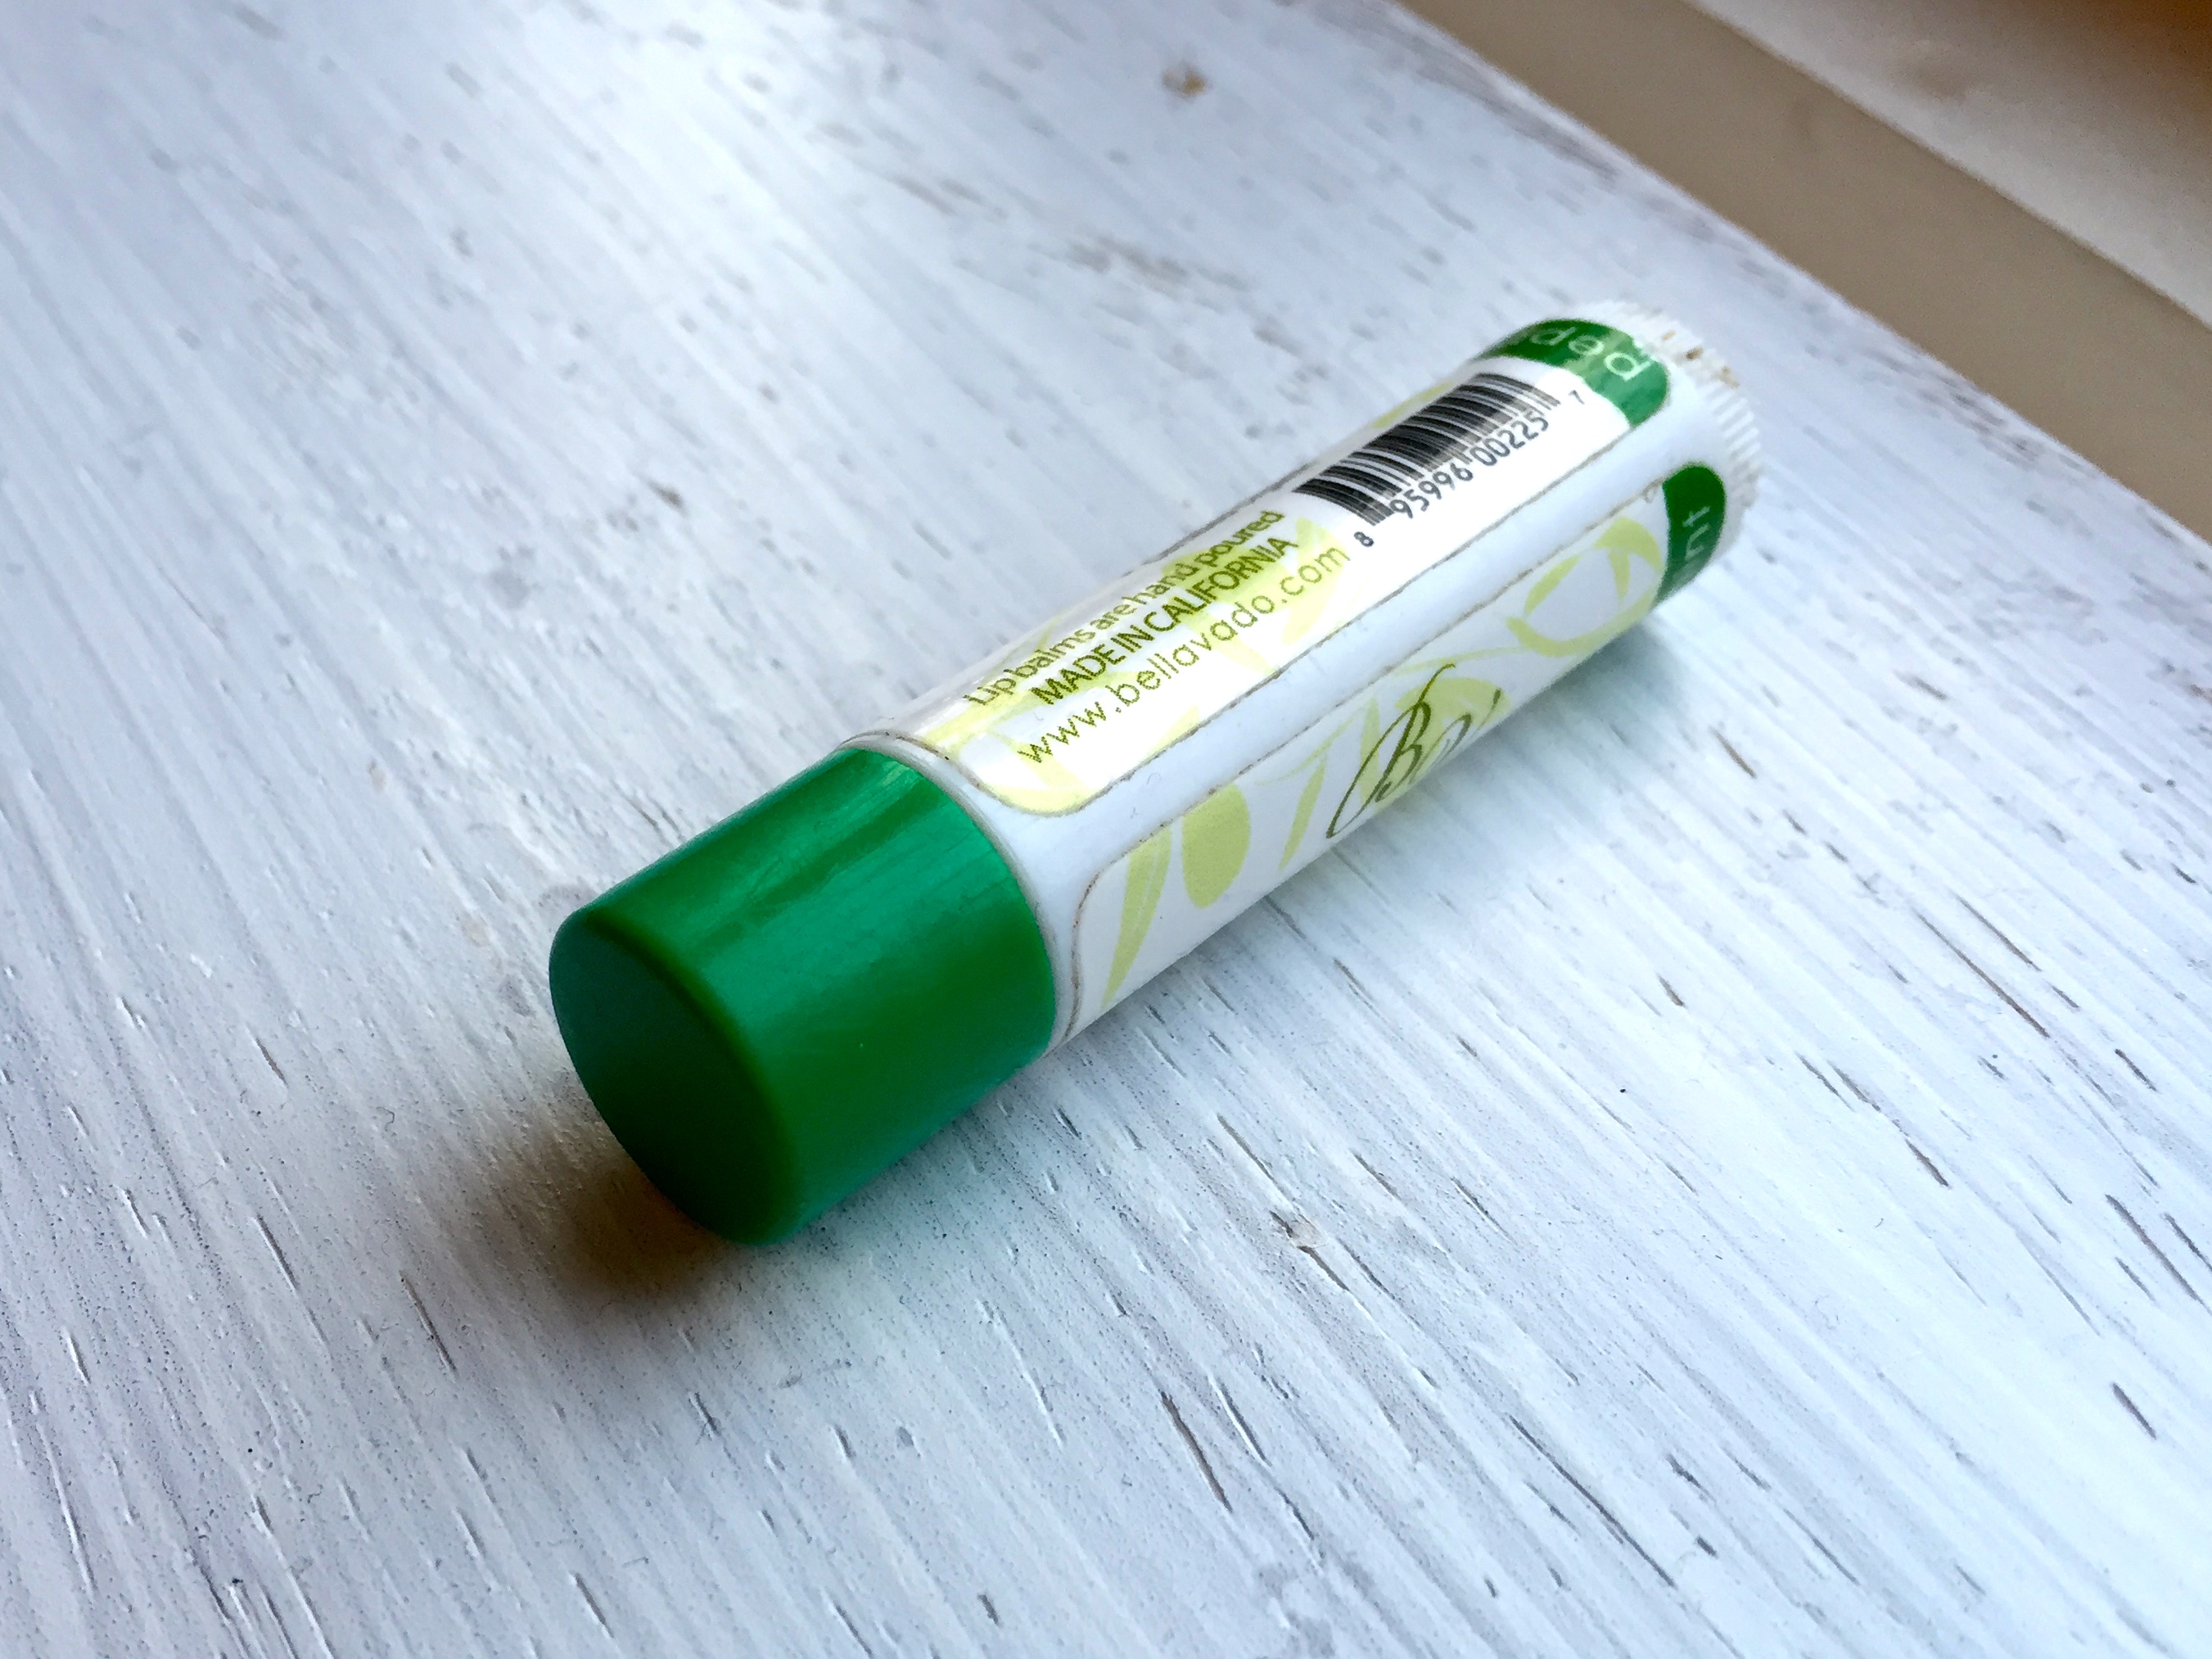 Lip balm for wrapping the wire